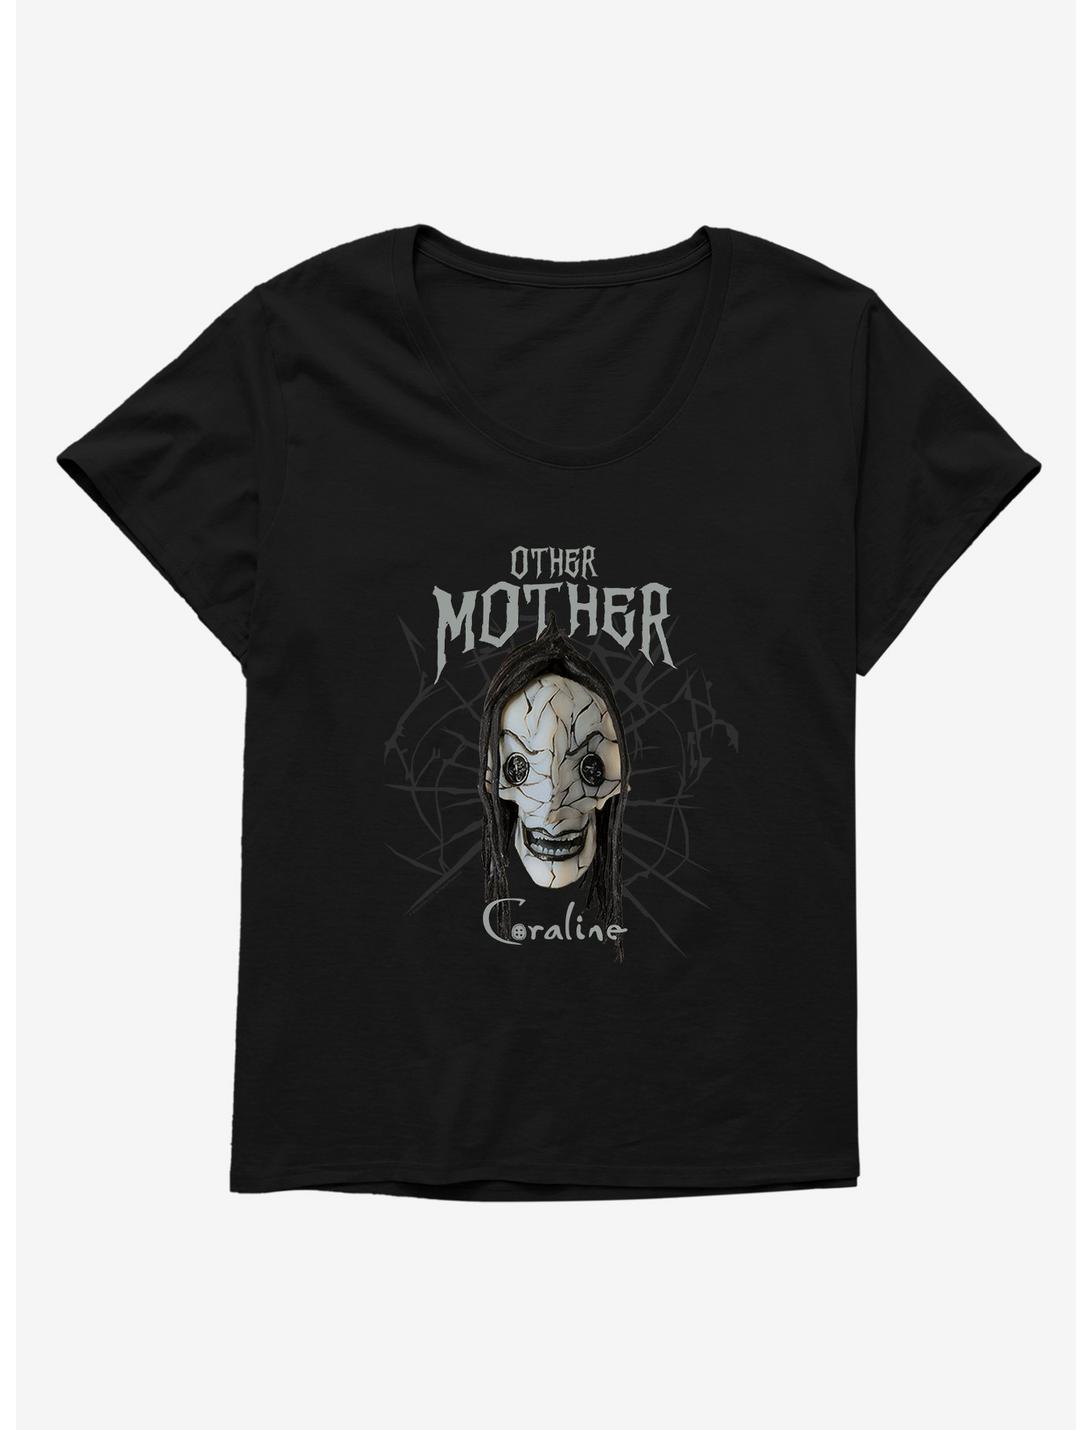 Coraline Other Mother Womens T-Shirt Plus Size, BLACK, hi-res